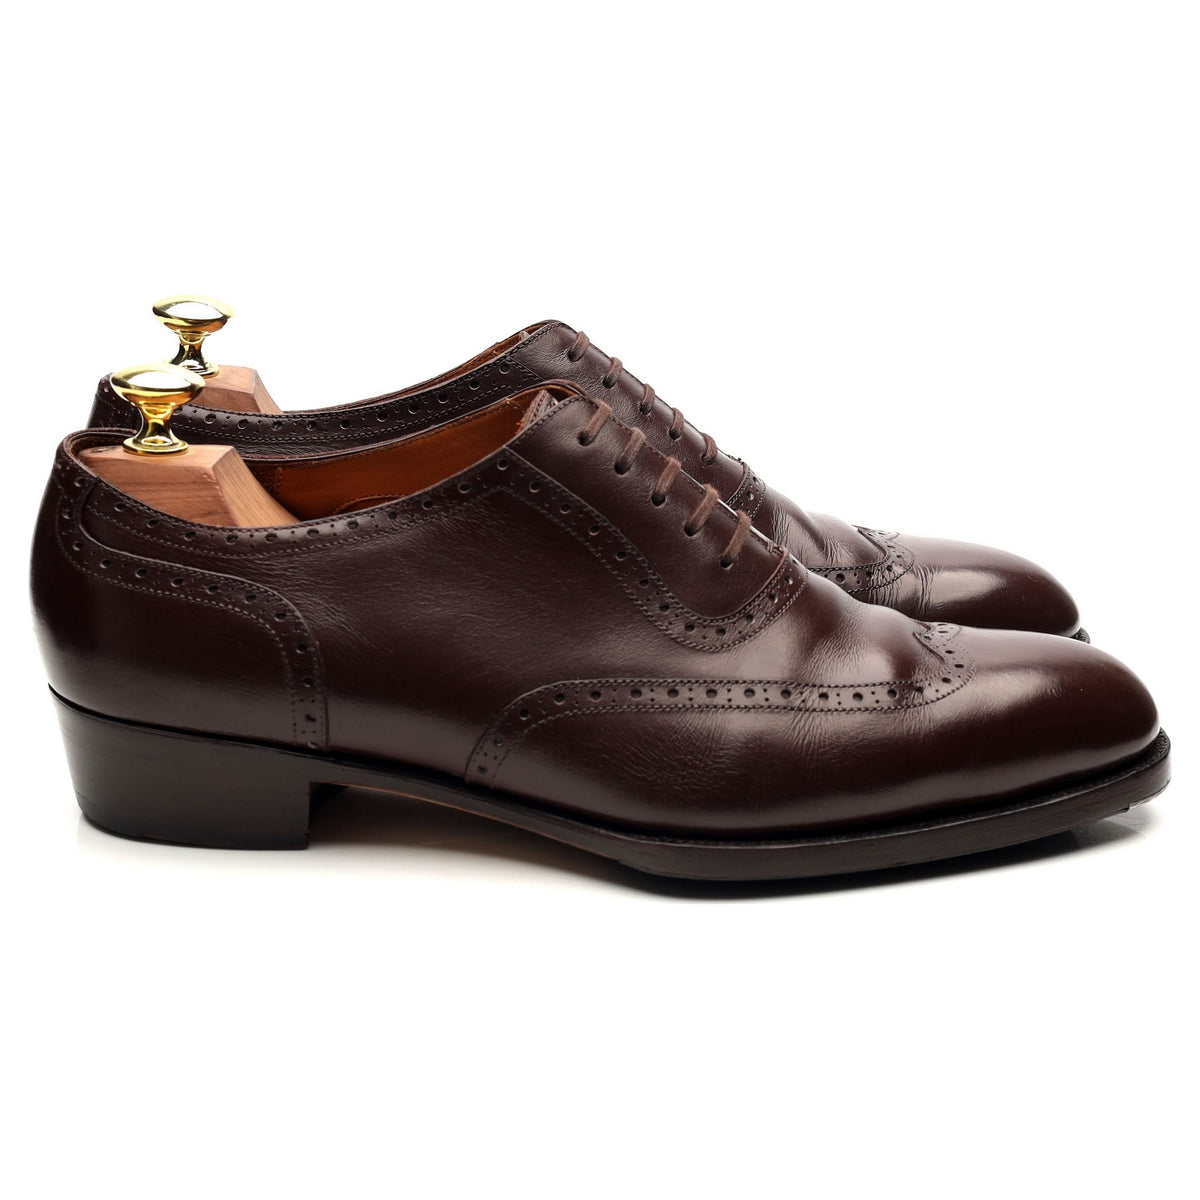 Oct. Tenth Dark Brown Leather Oxford Brogues UK 7.5